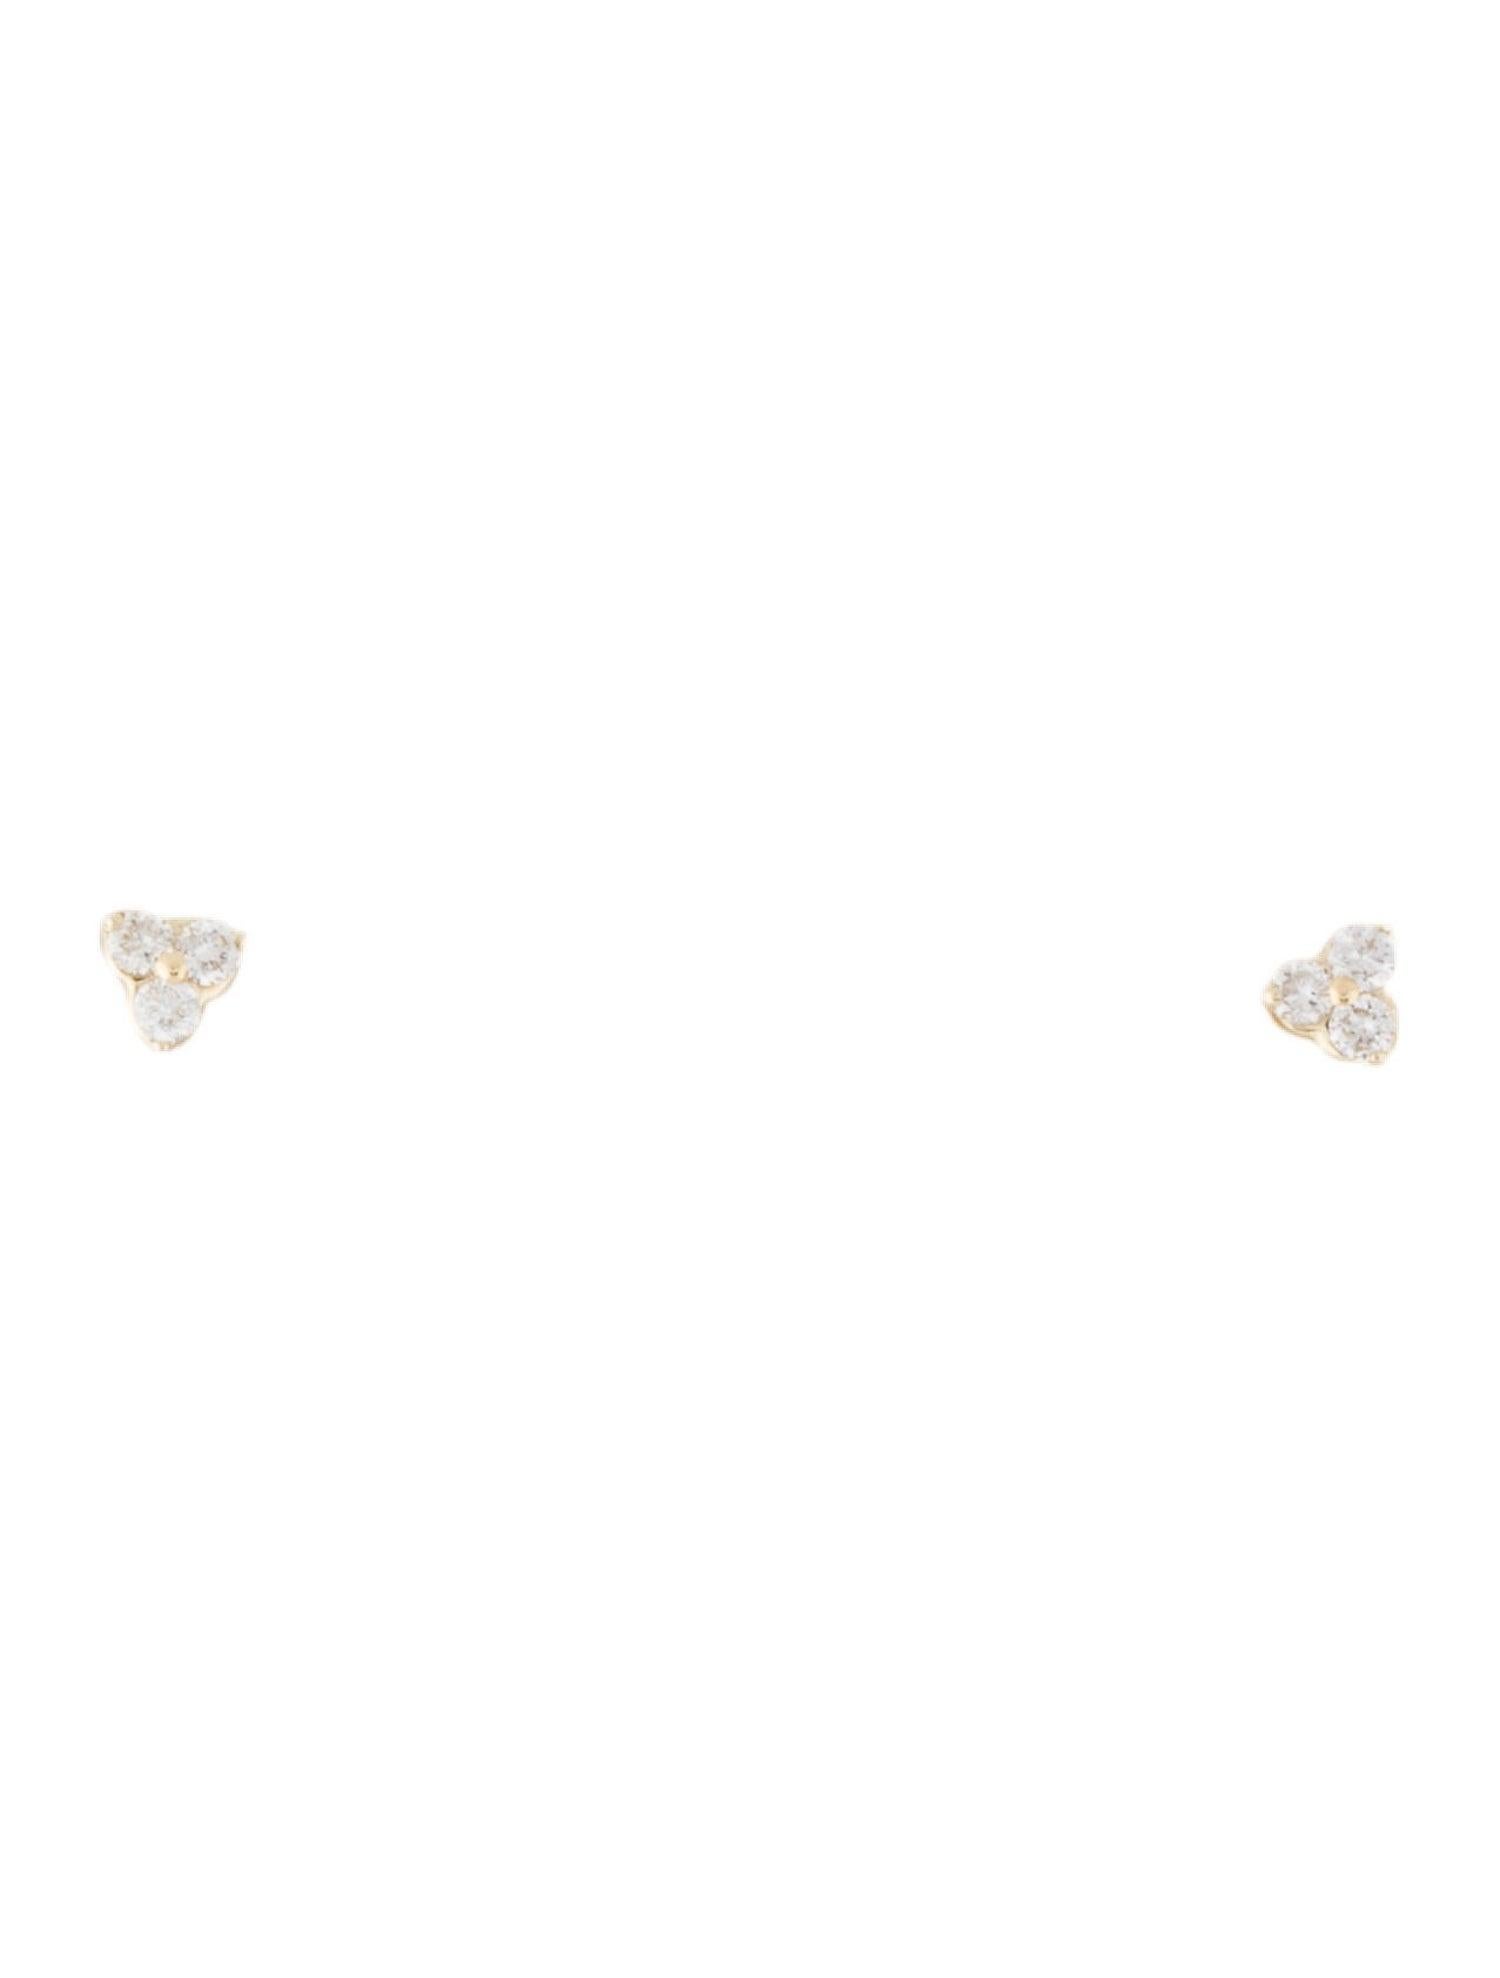 Beautiful & Classic Small  3-Stone Studs Earrings! Crafted of 14k Gold with approximately 0.06 ct. of Sparkly Diamonds. Diamond Color and Clarity GH-SI1-SI2. Secured with butterfly push back closure. This piece is perfect for everyday wear and makes